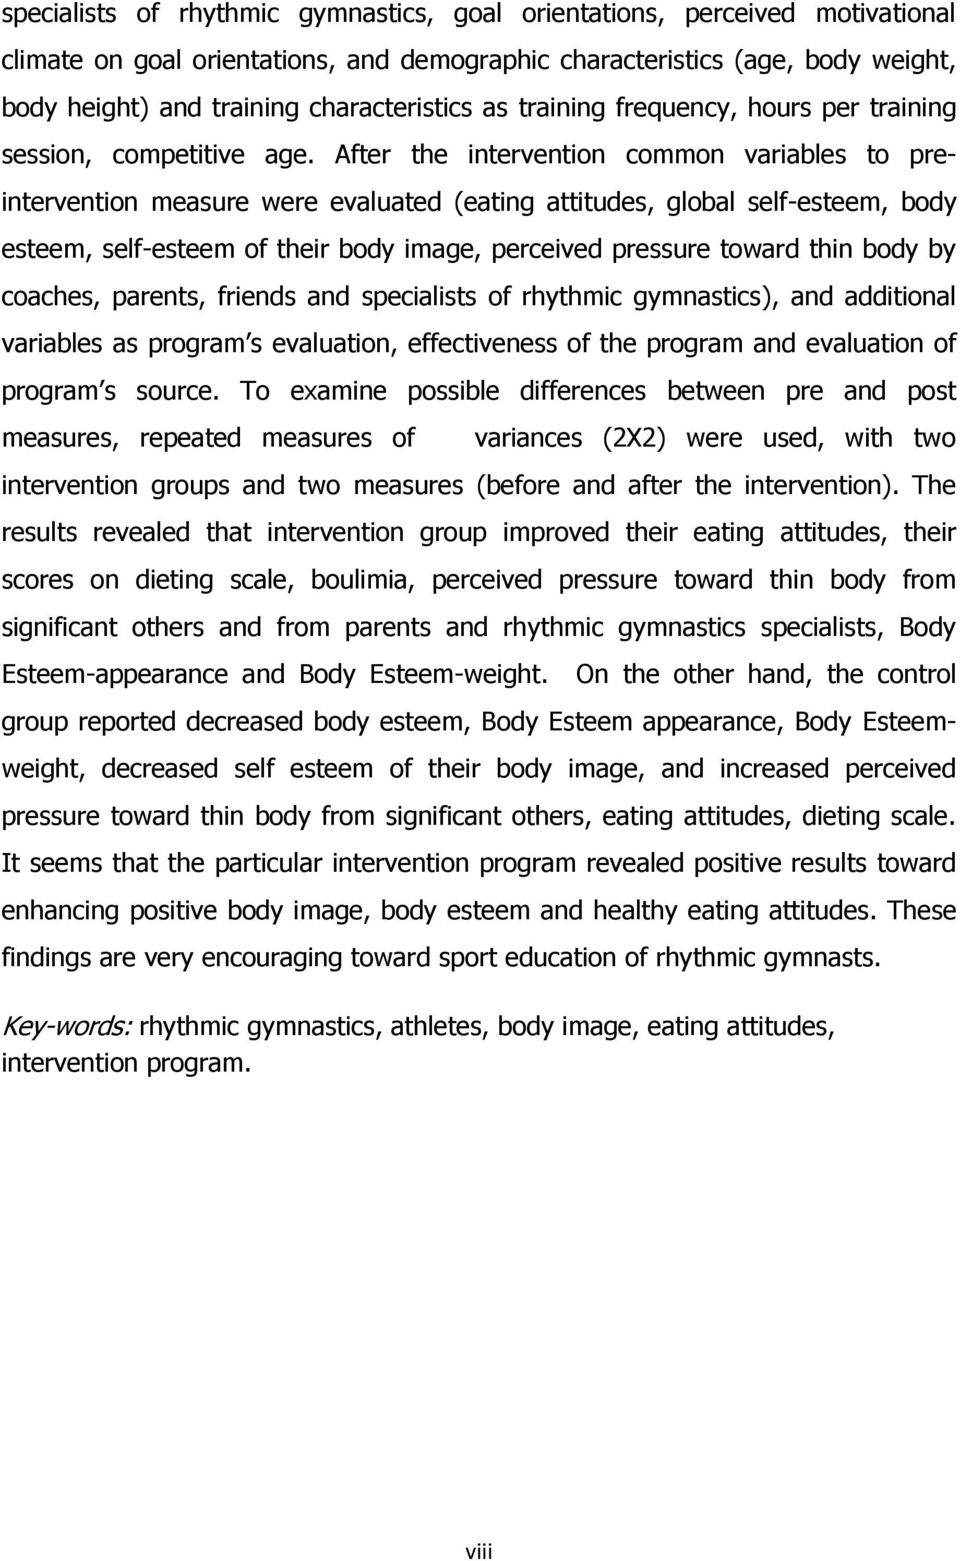 After the intervention common variables to preintervention measure were evaluated (eating attitudes, global self-esteem, body esteem, self-esteem of their body image, perceived pressure toward thin